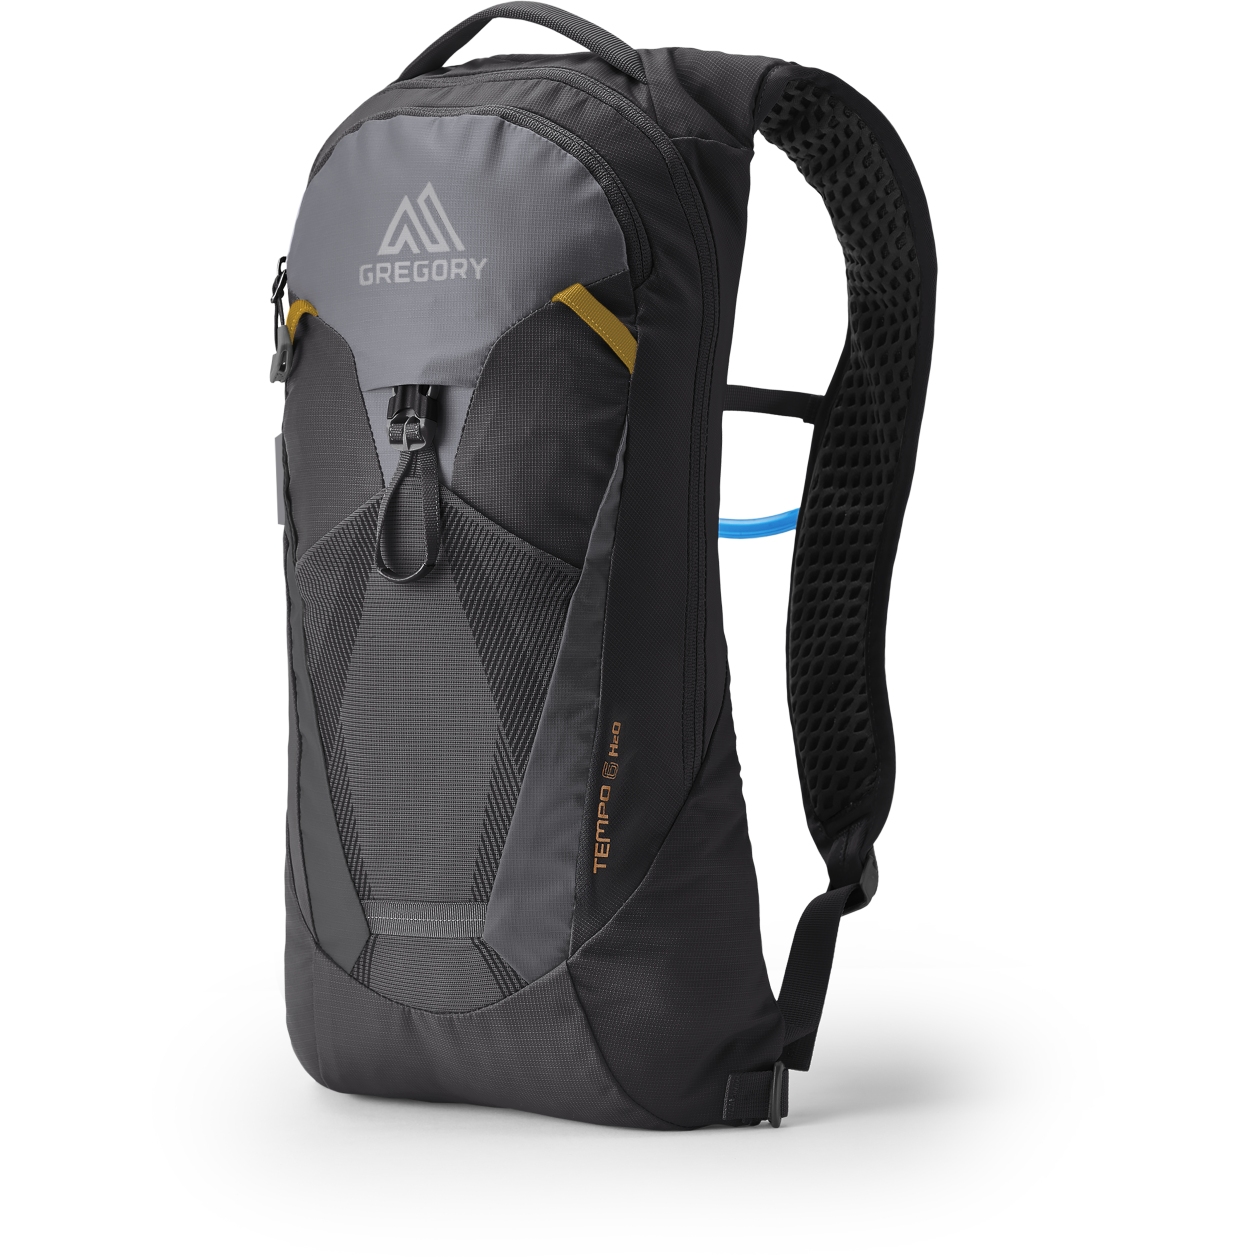 Productfoto van Gregory Tempo 6 H2O Backpack - Carbon Bronze